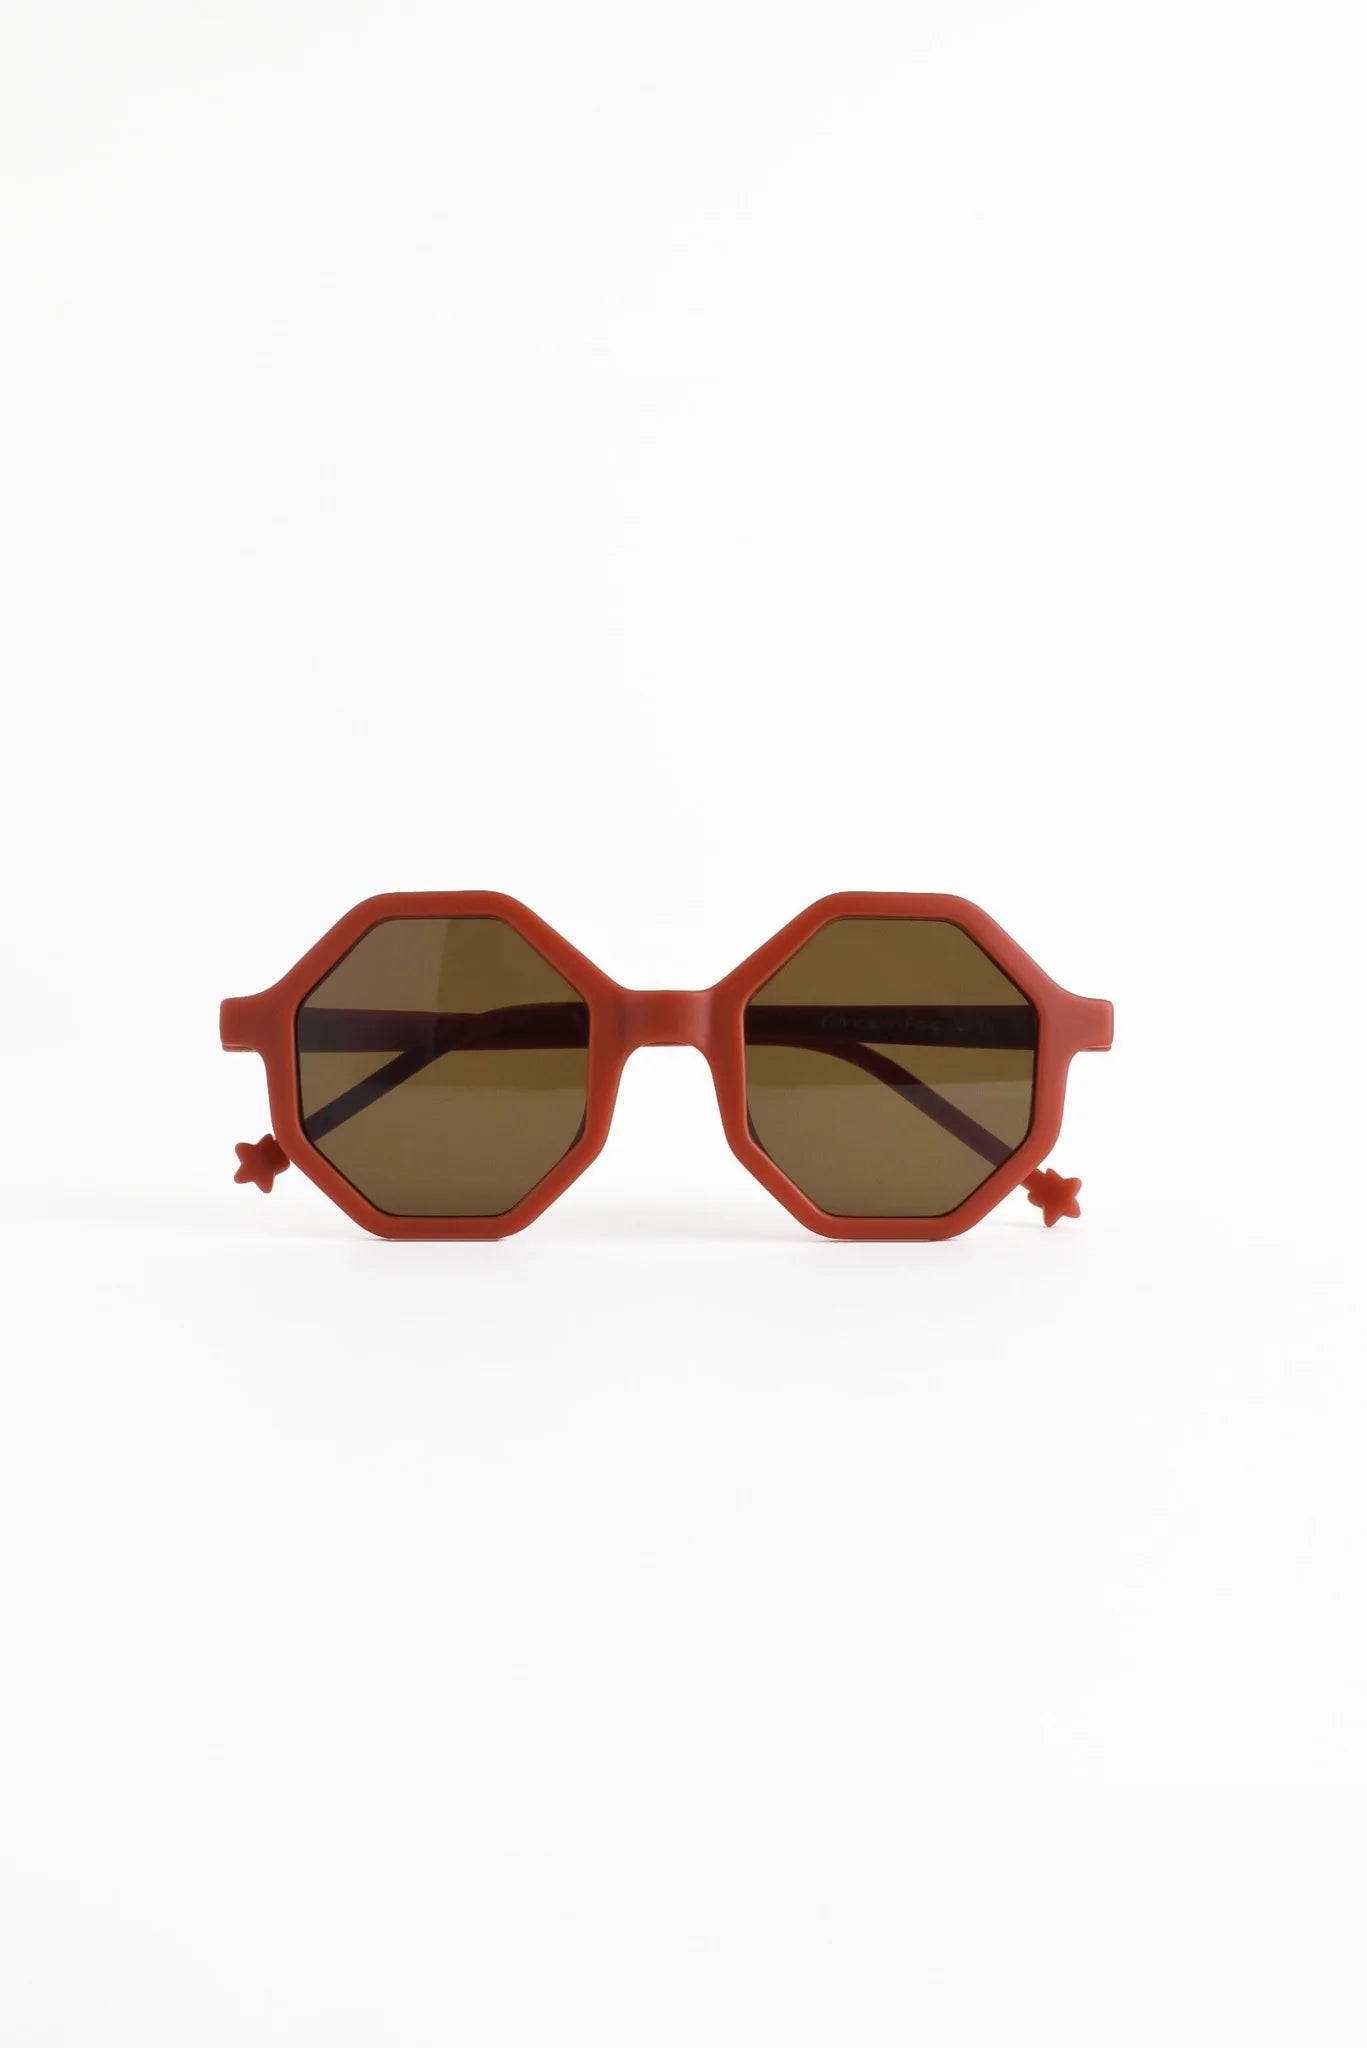 Sunglasses 2 to 8 years old - Terracotta